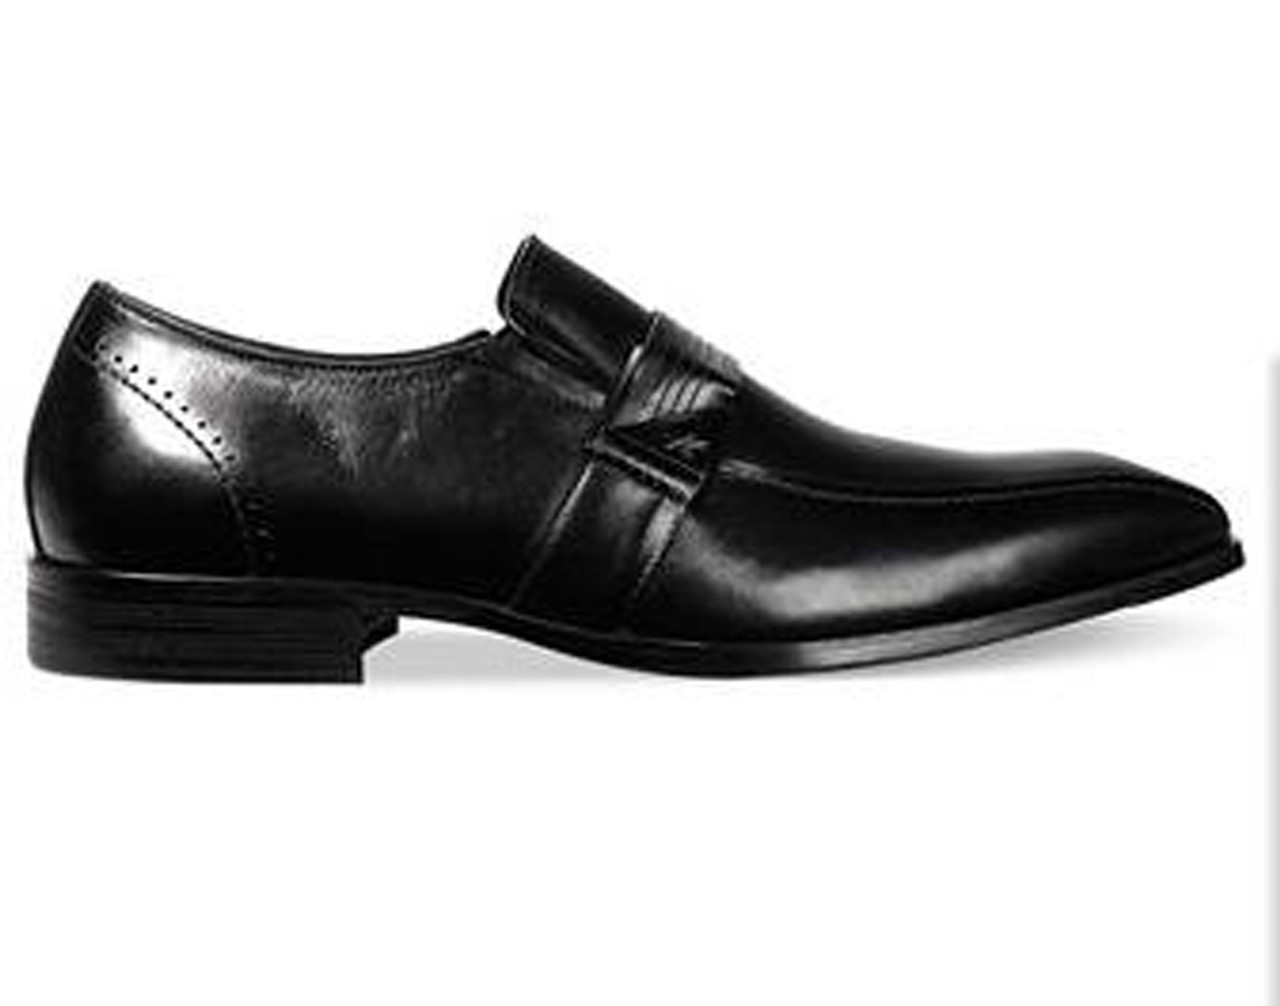 Kenneth Cole U Name It Men's Loafers Shoes, Black and Cognac